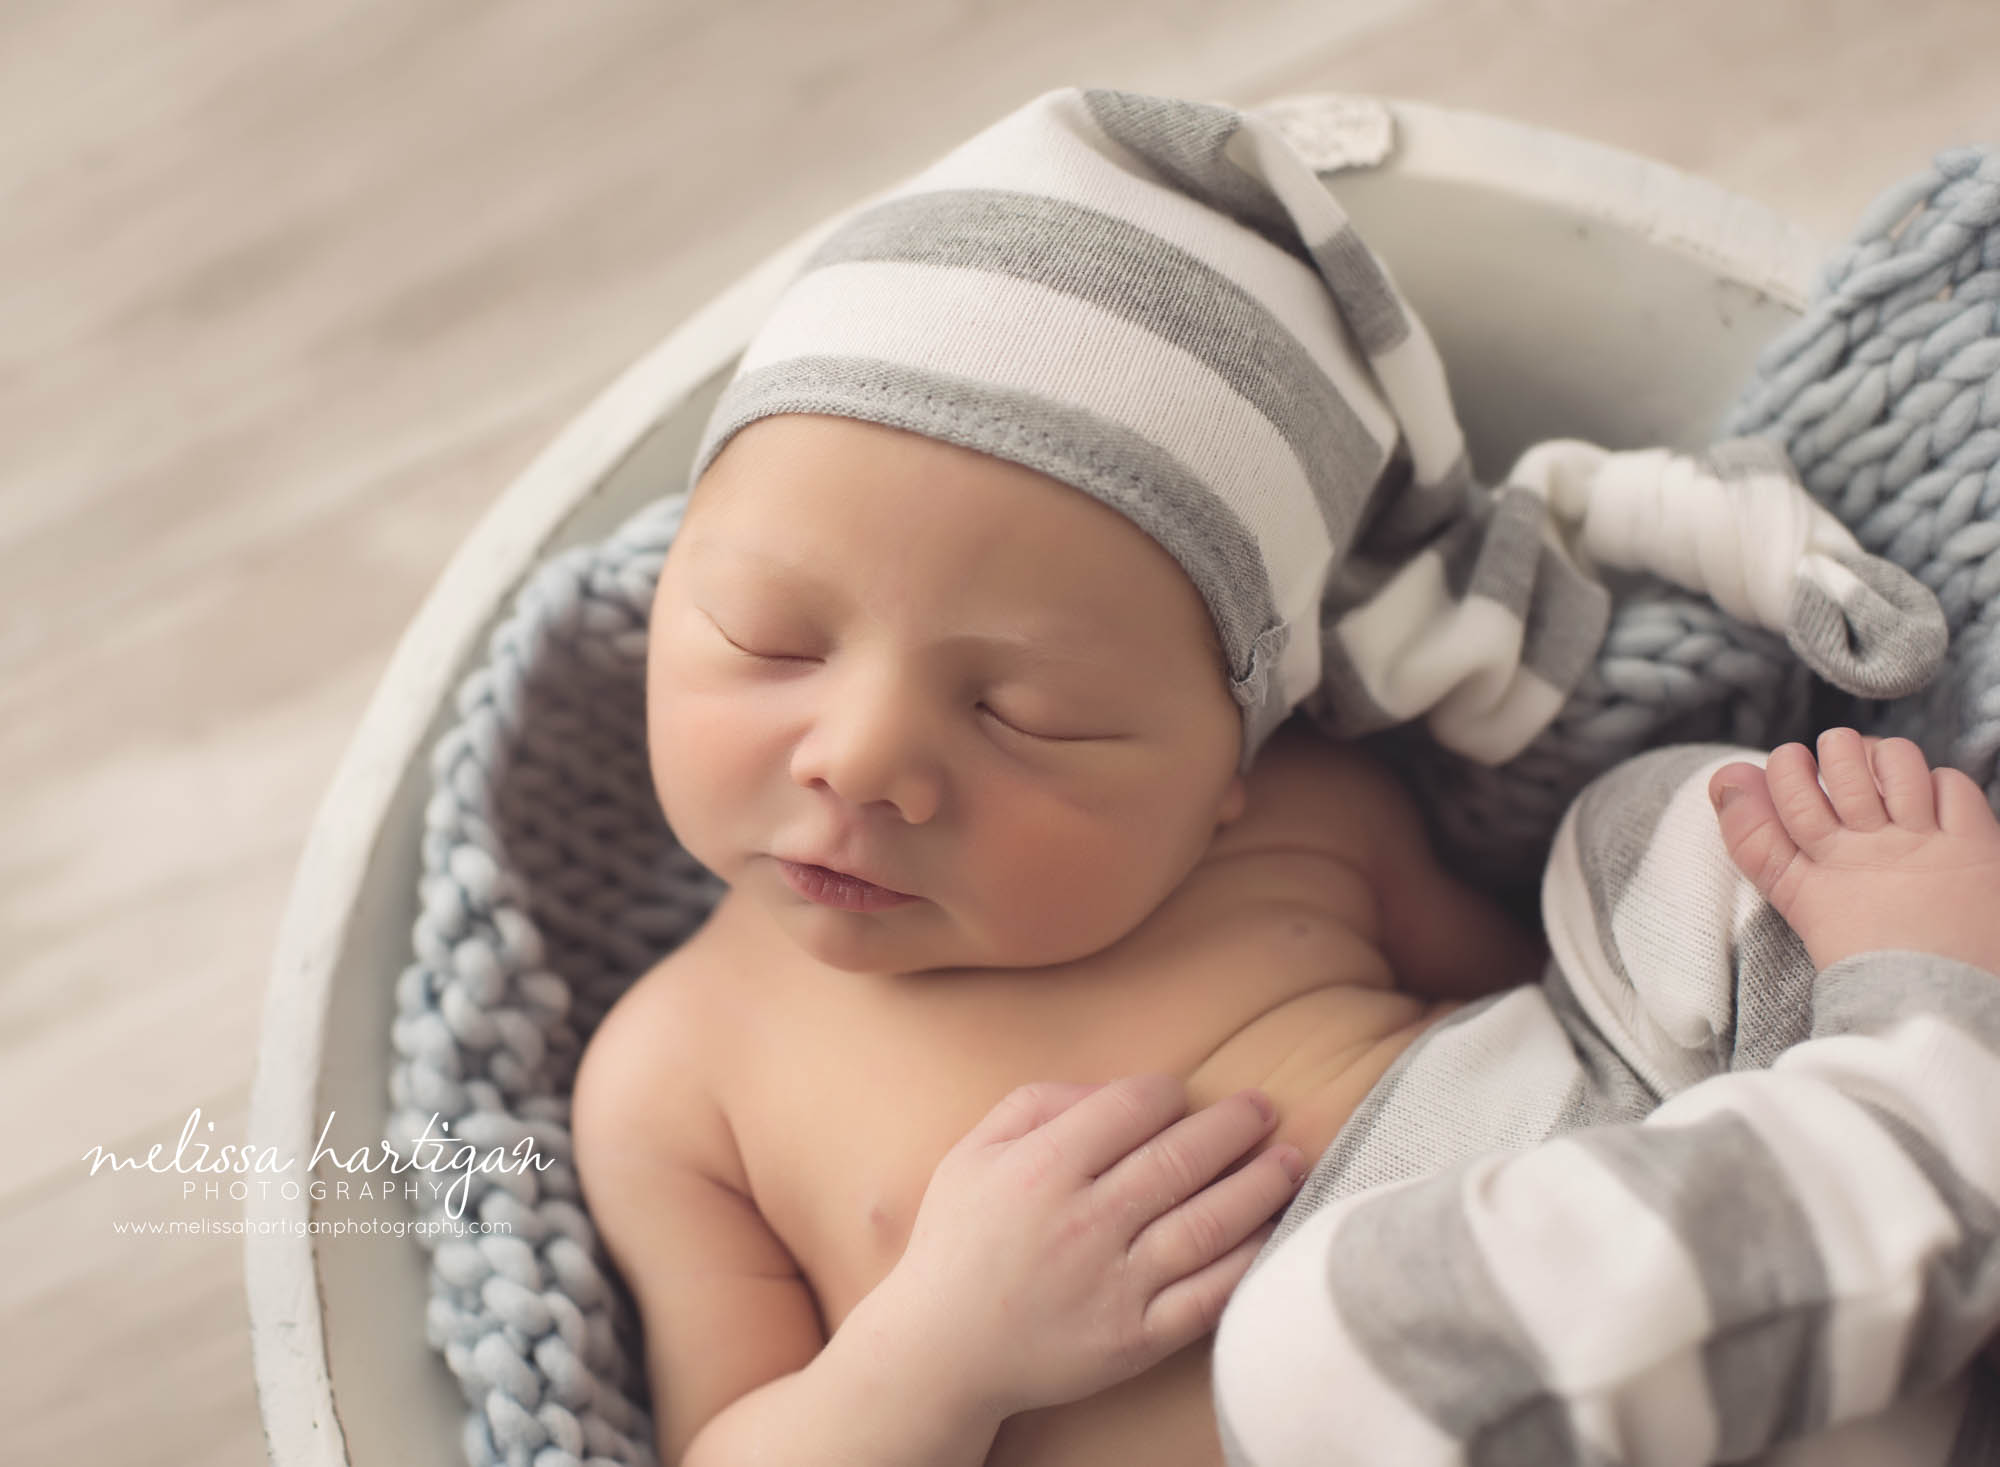 Melissa Hartigan Photography CT Newborn Photographer Braeden Newborn Session baby boy sleeping in white wooden bowl with gray blanket wearing striped knit gray and white hat and pants